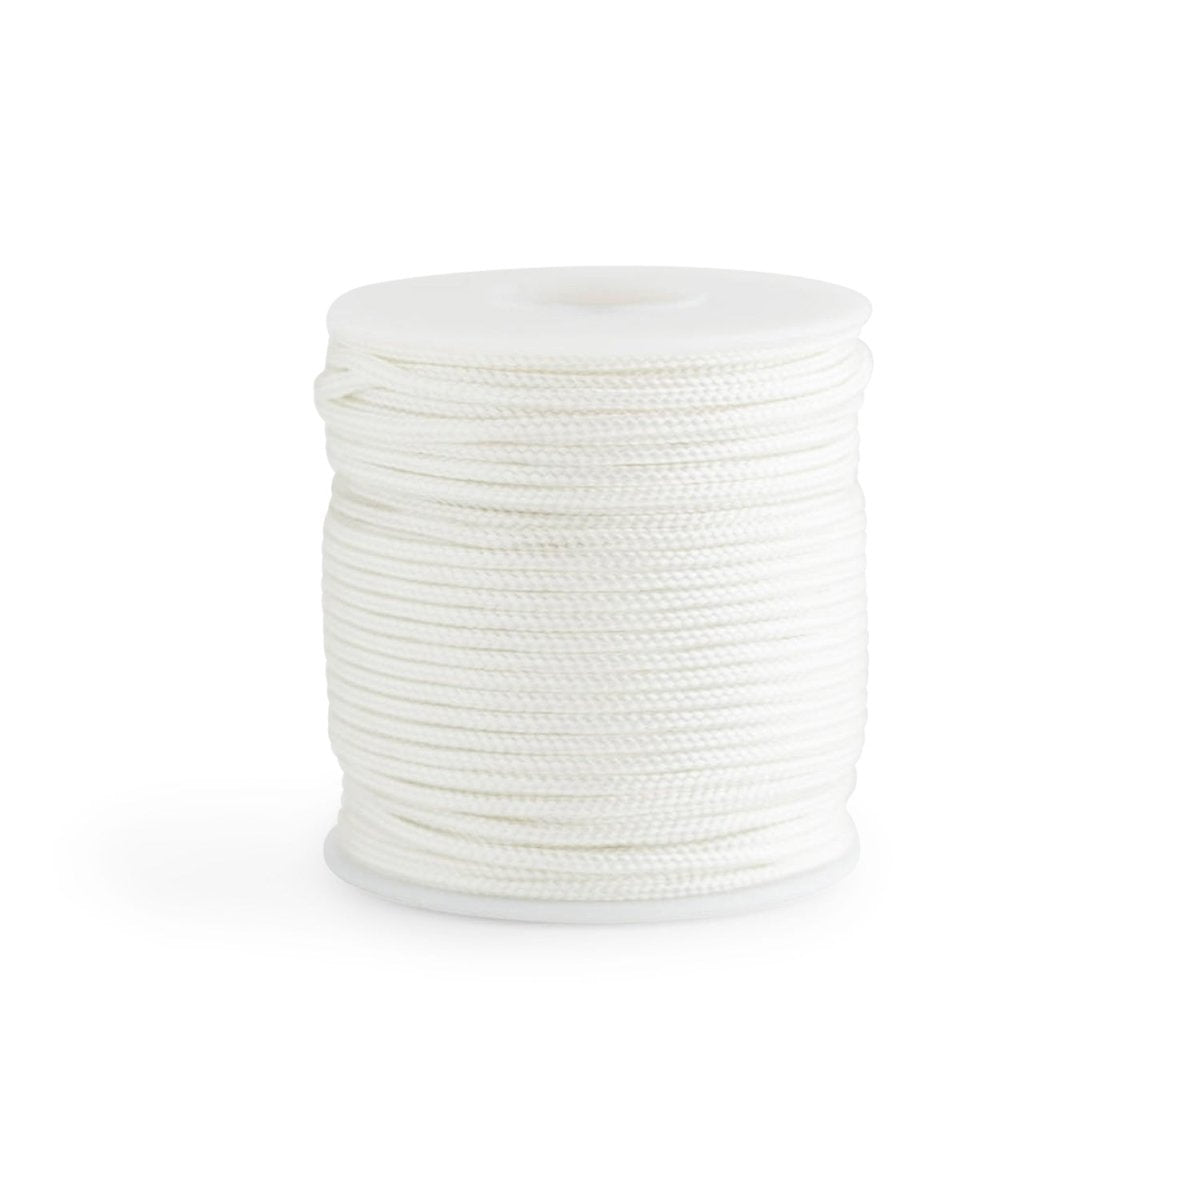 LAST CHANCE Nylon Paracord - Non-Fusing White from Cara & Co Craft Supply